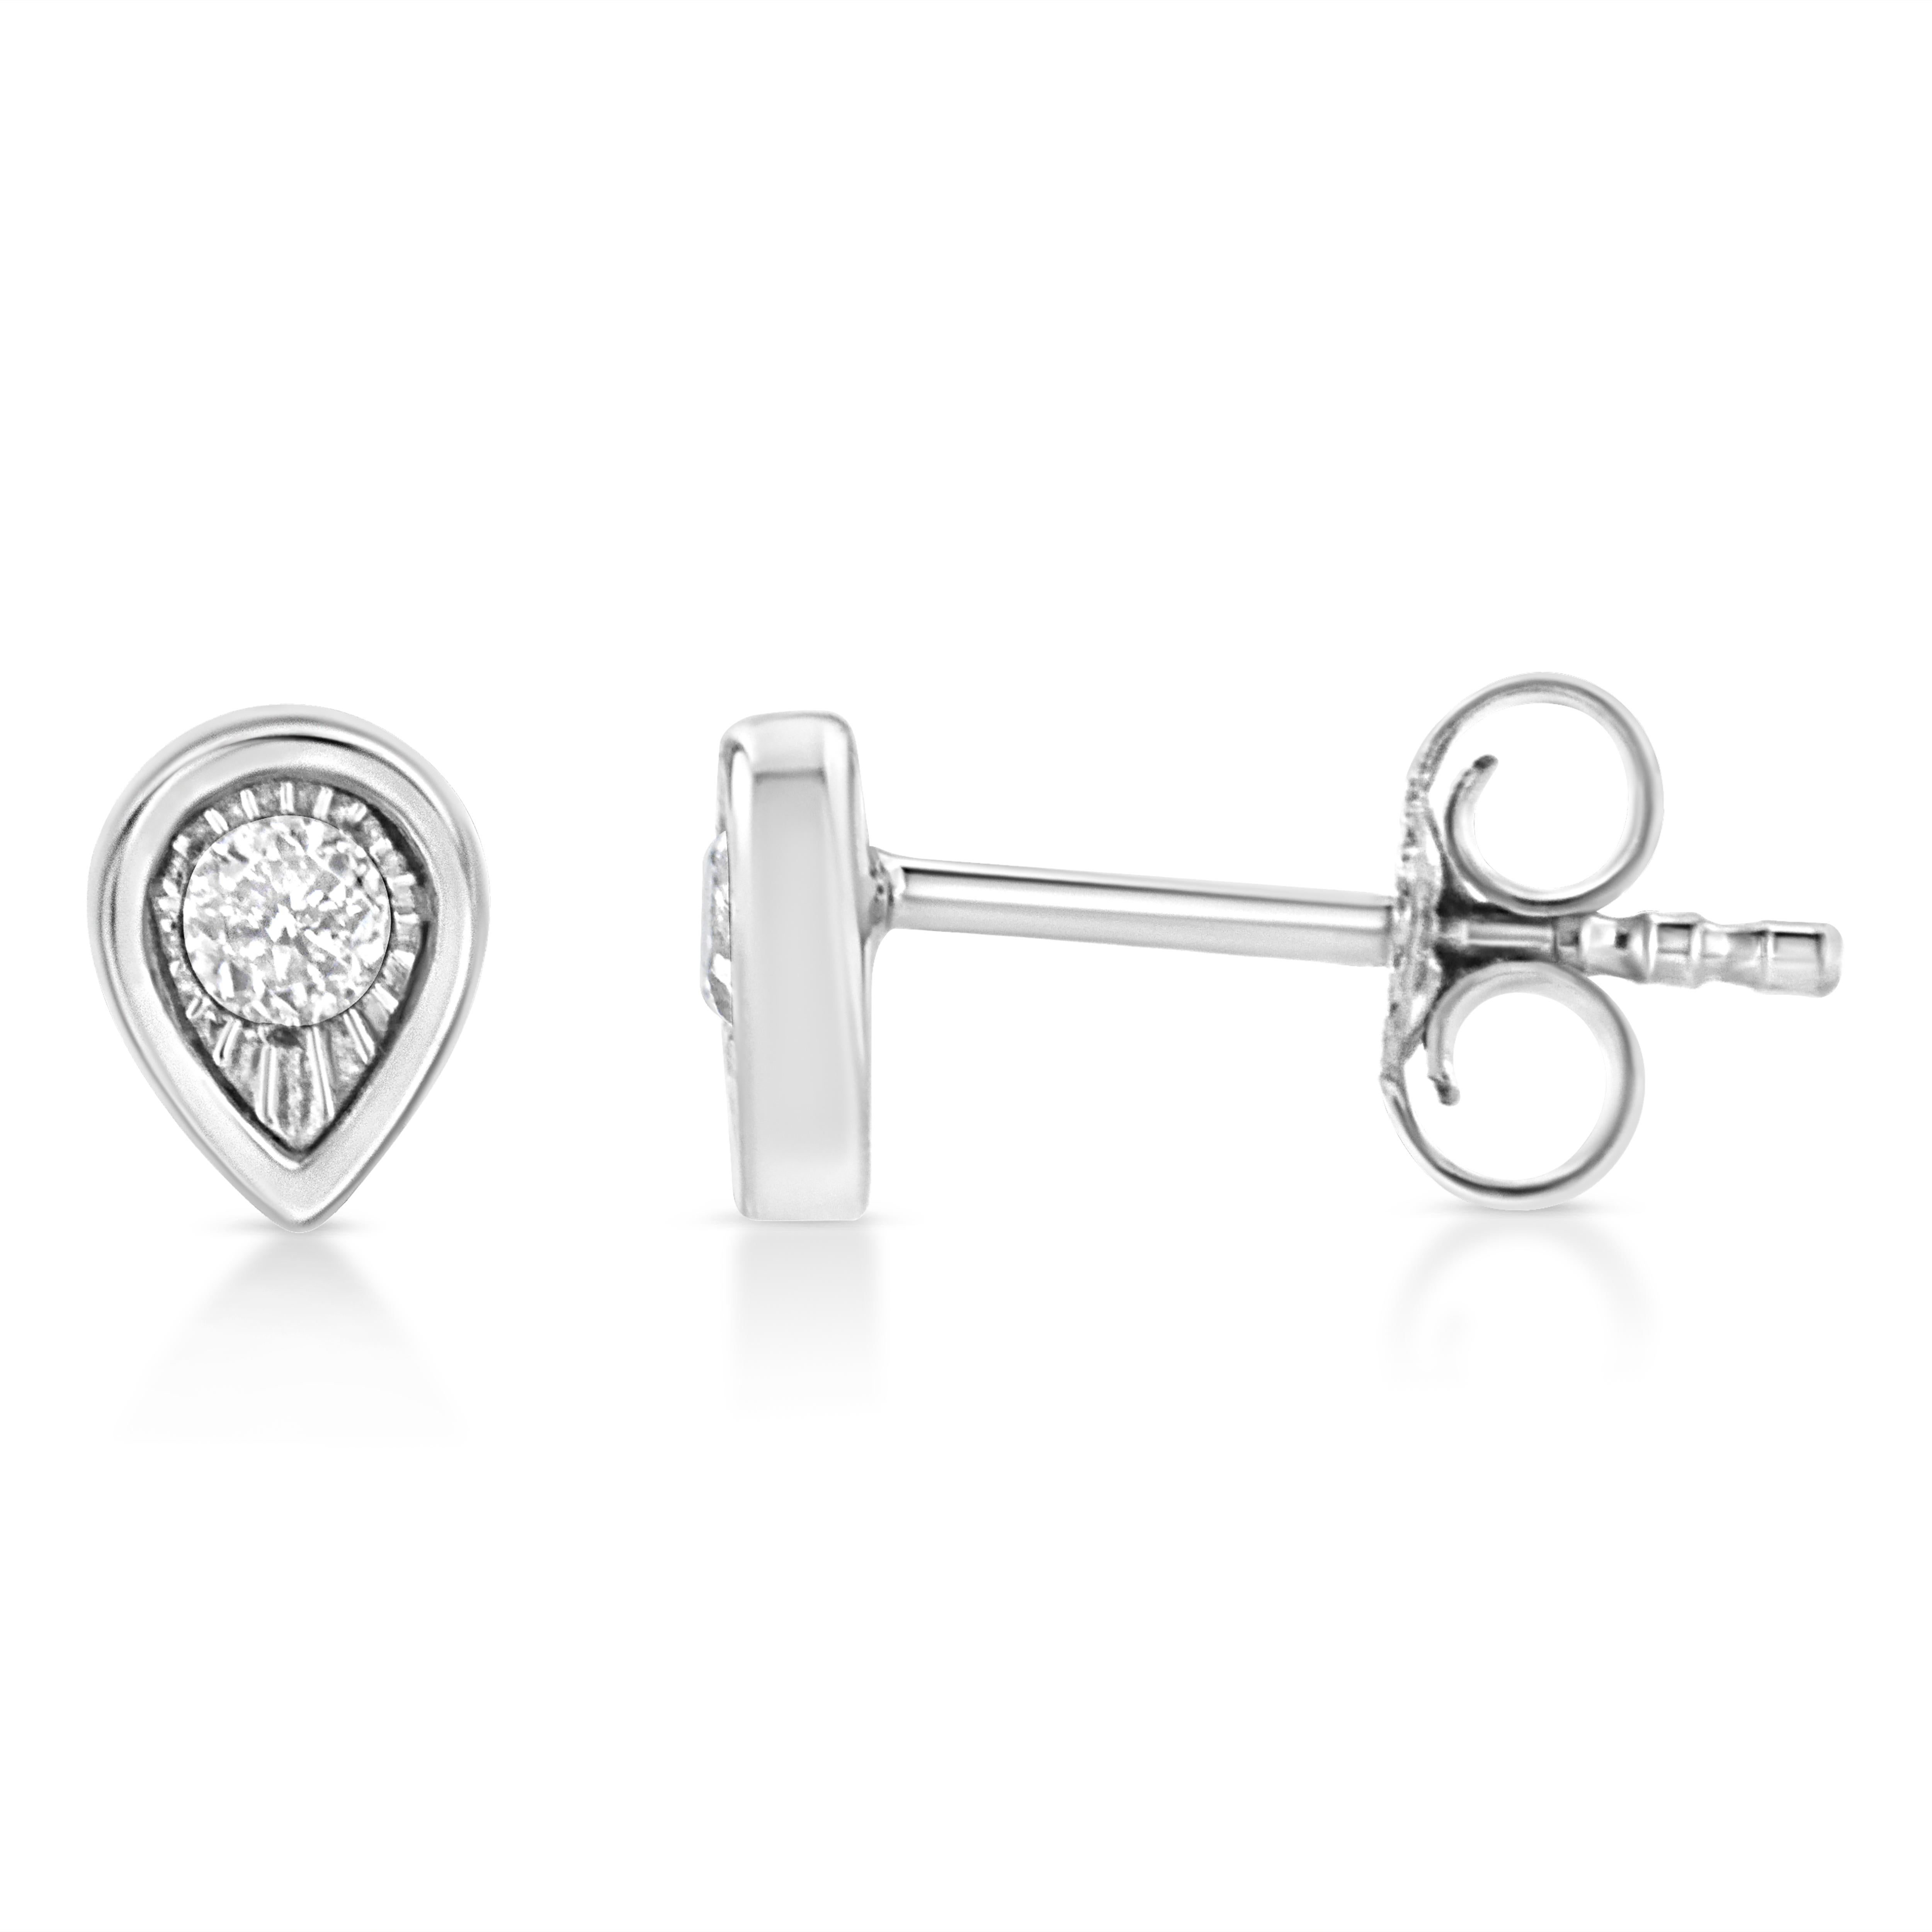 These pear shaped stud earrings are crafted in .925 sterling silver and feature 1/10ct TDW of diamonds. Each earring features a single sparkling round cut diamond in a miracle setting that adds to the earrings' sparkle. A polished silver halo